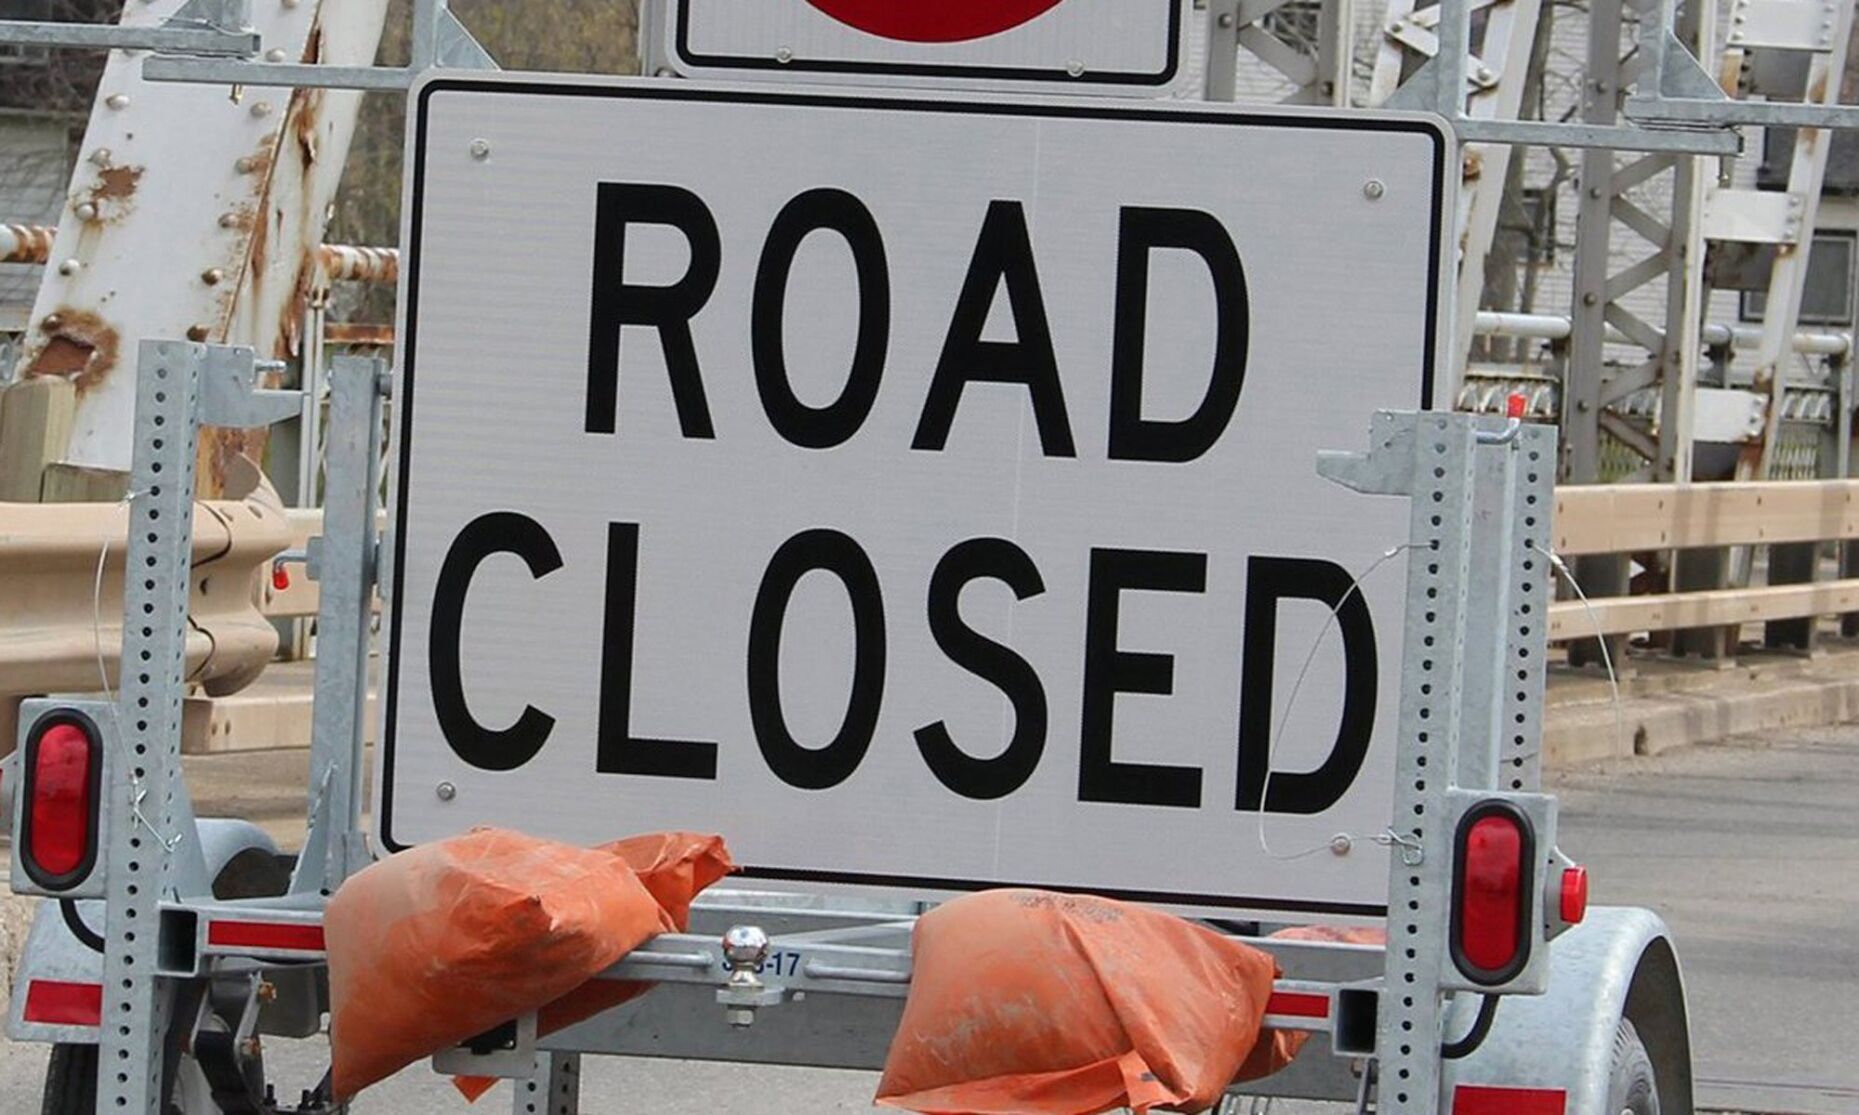 Wednesday, March 15 updates on traffic, weather and road closures | News